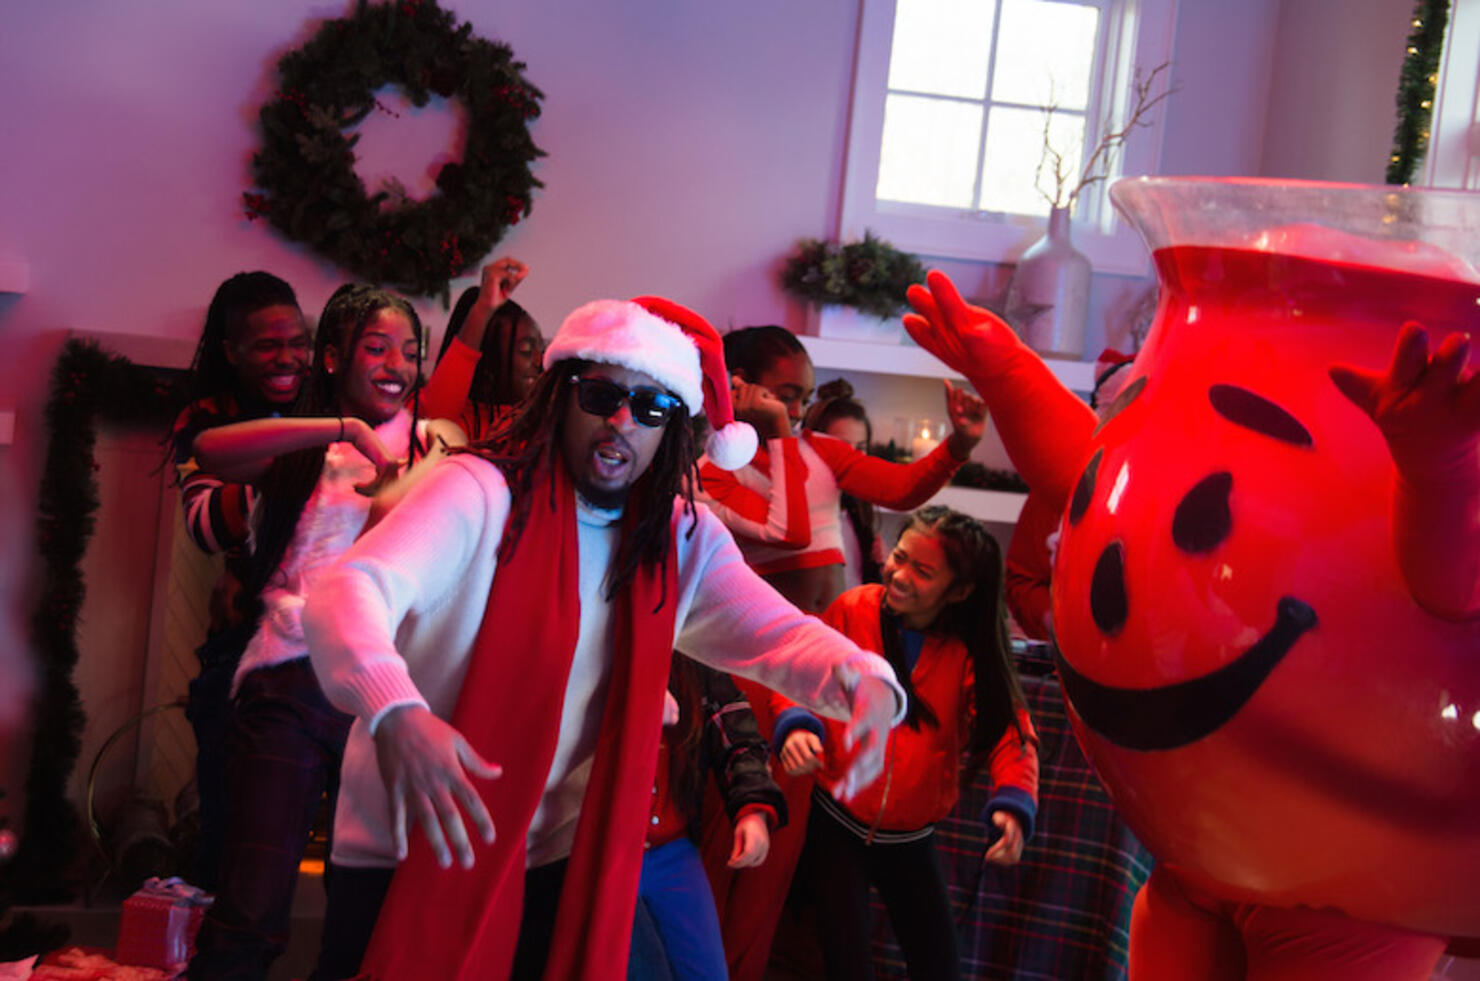 Lil Jon "All I Really Want For Christmas" Music Video